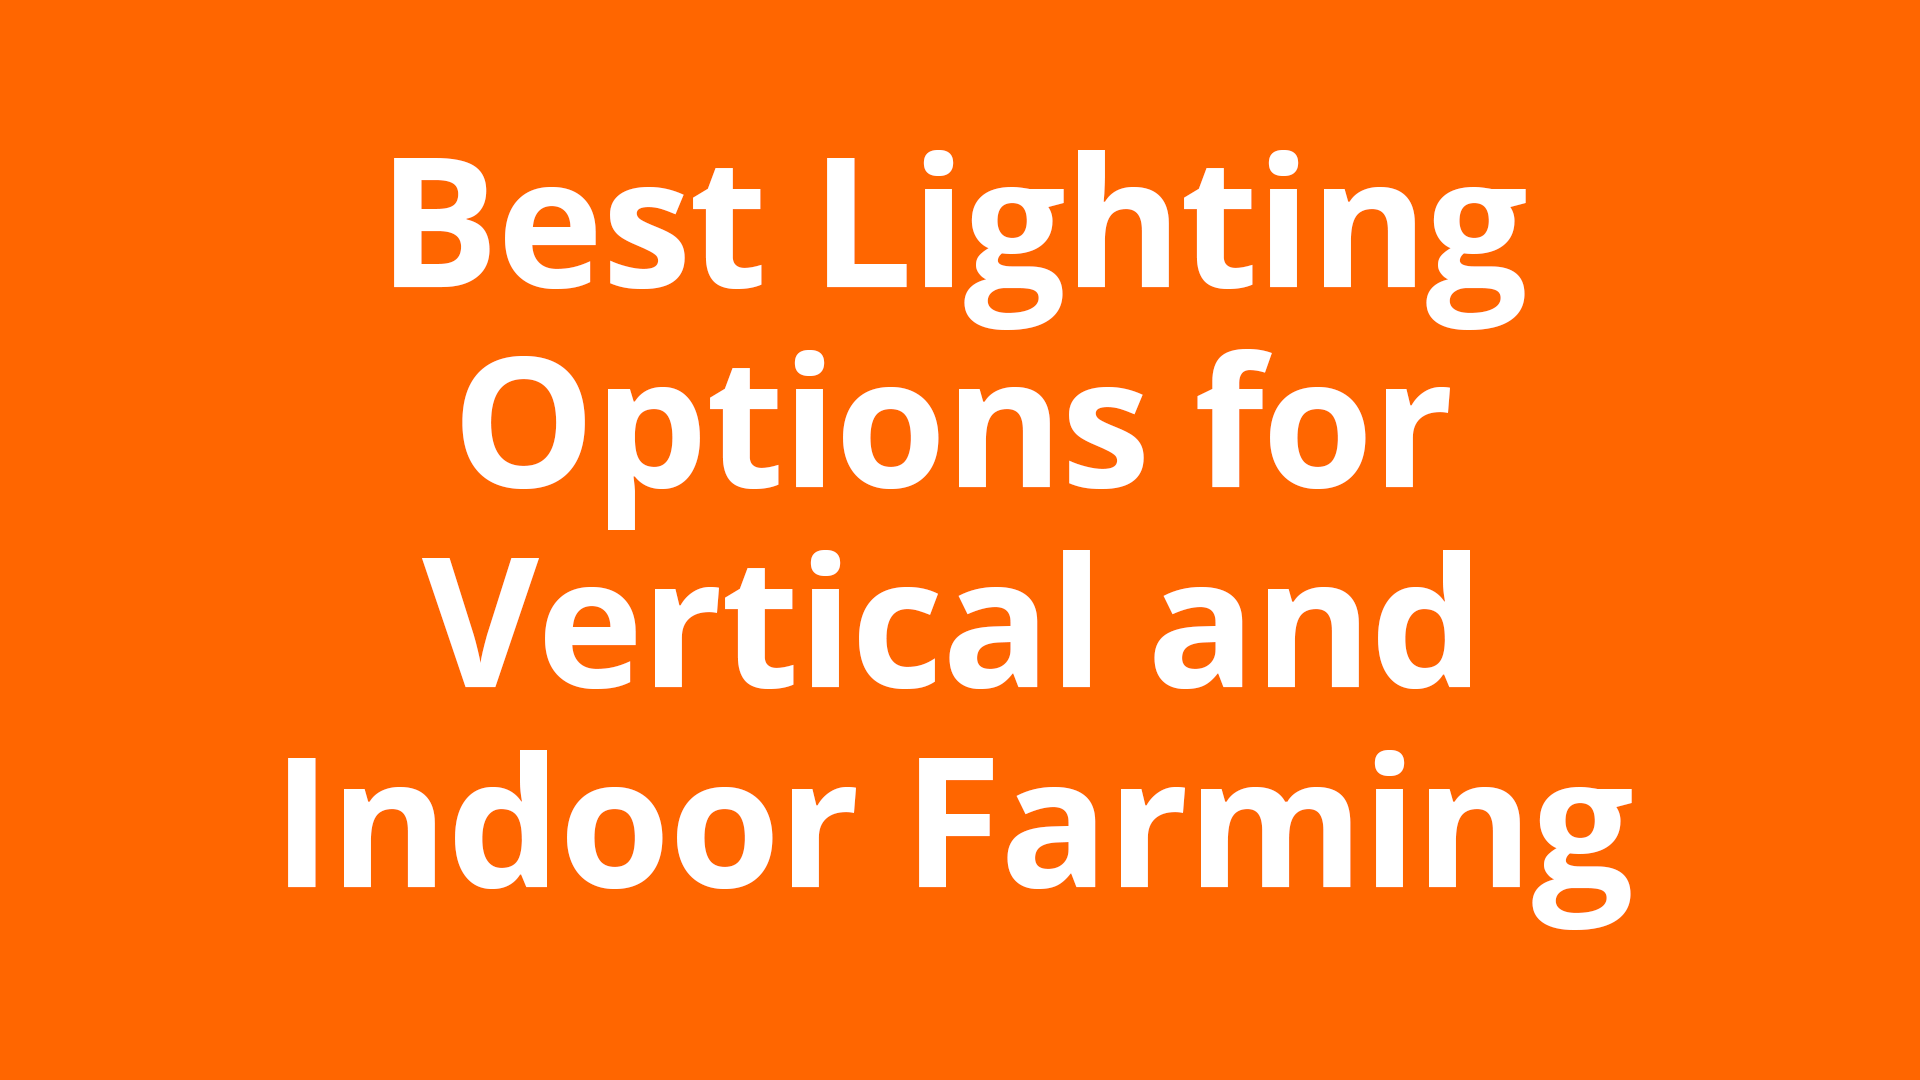 Best Lighting Options for Vertical and Indoor Farming